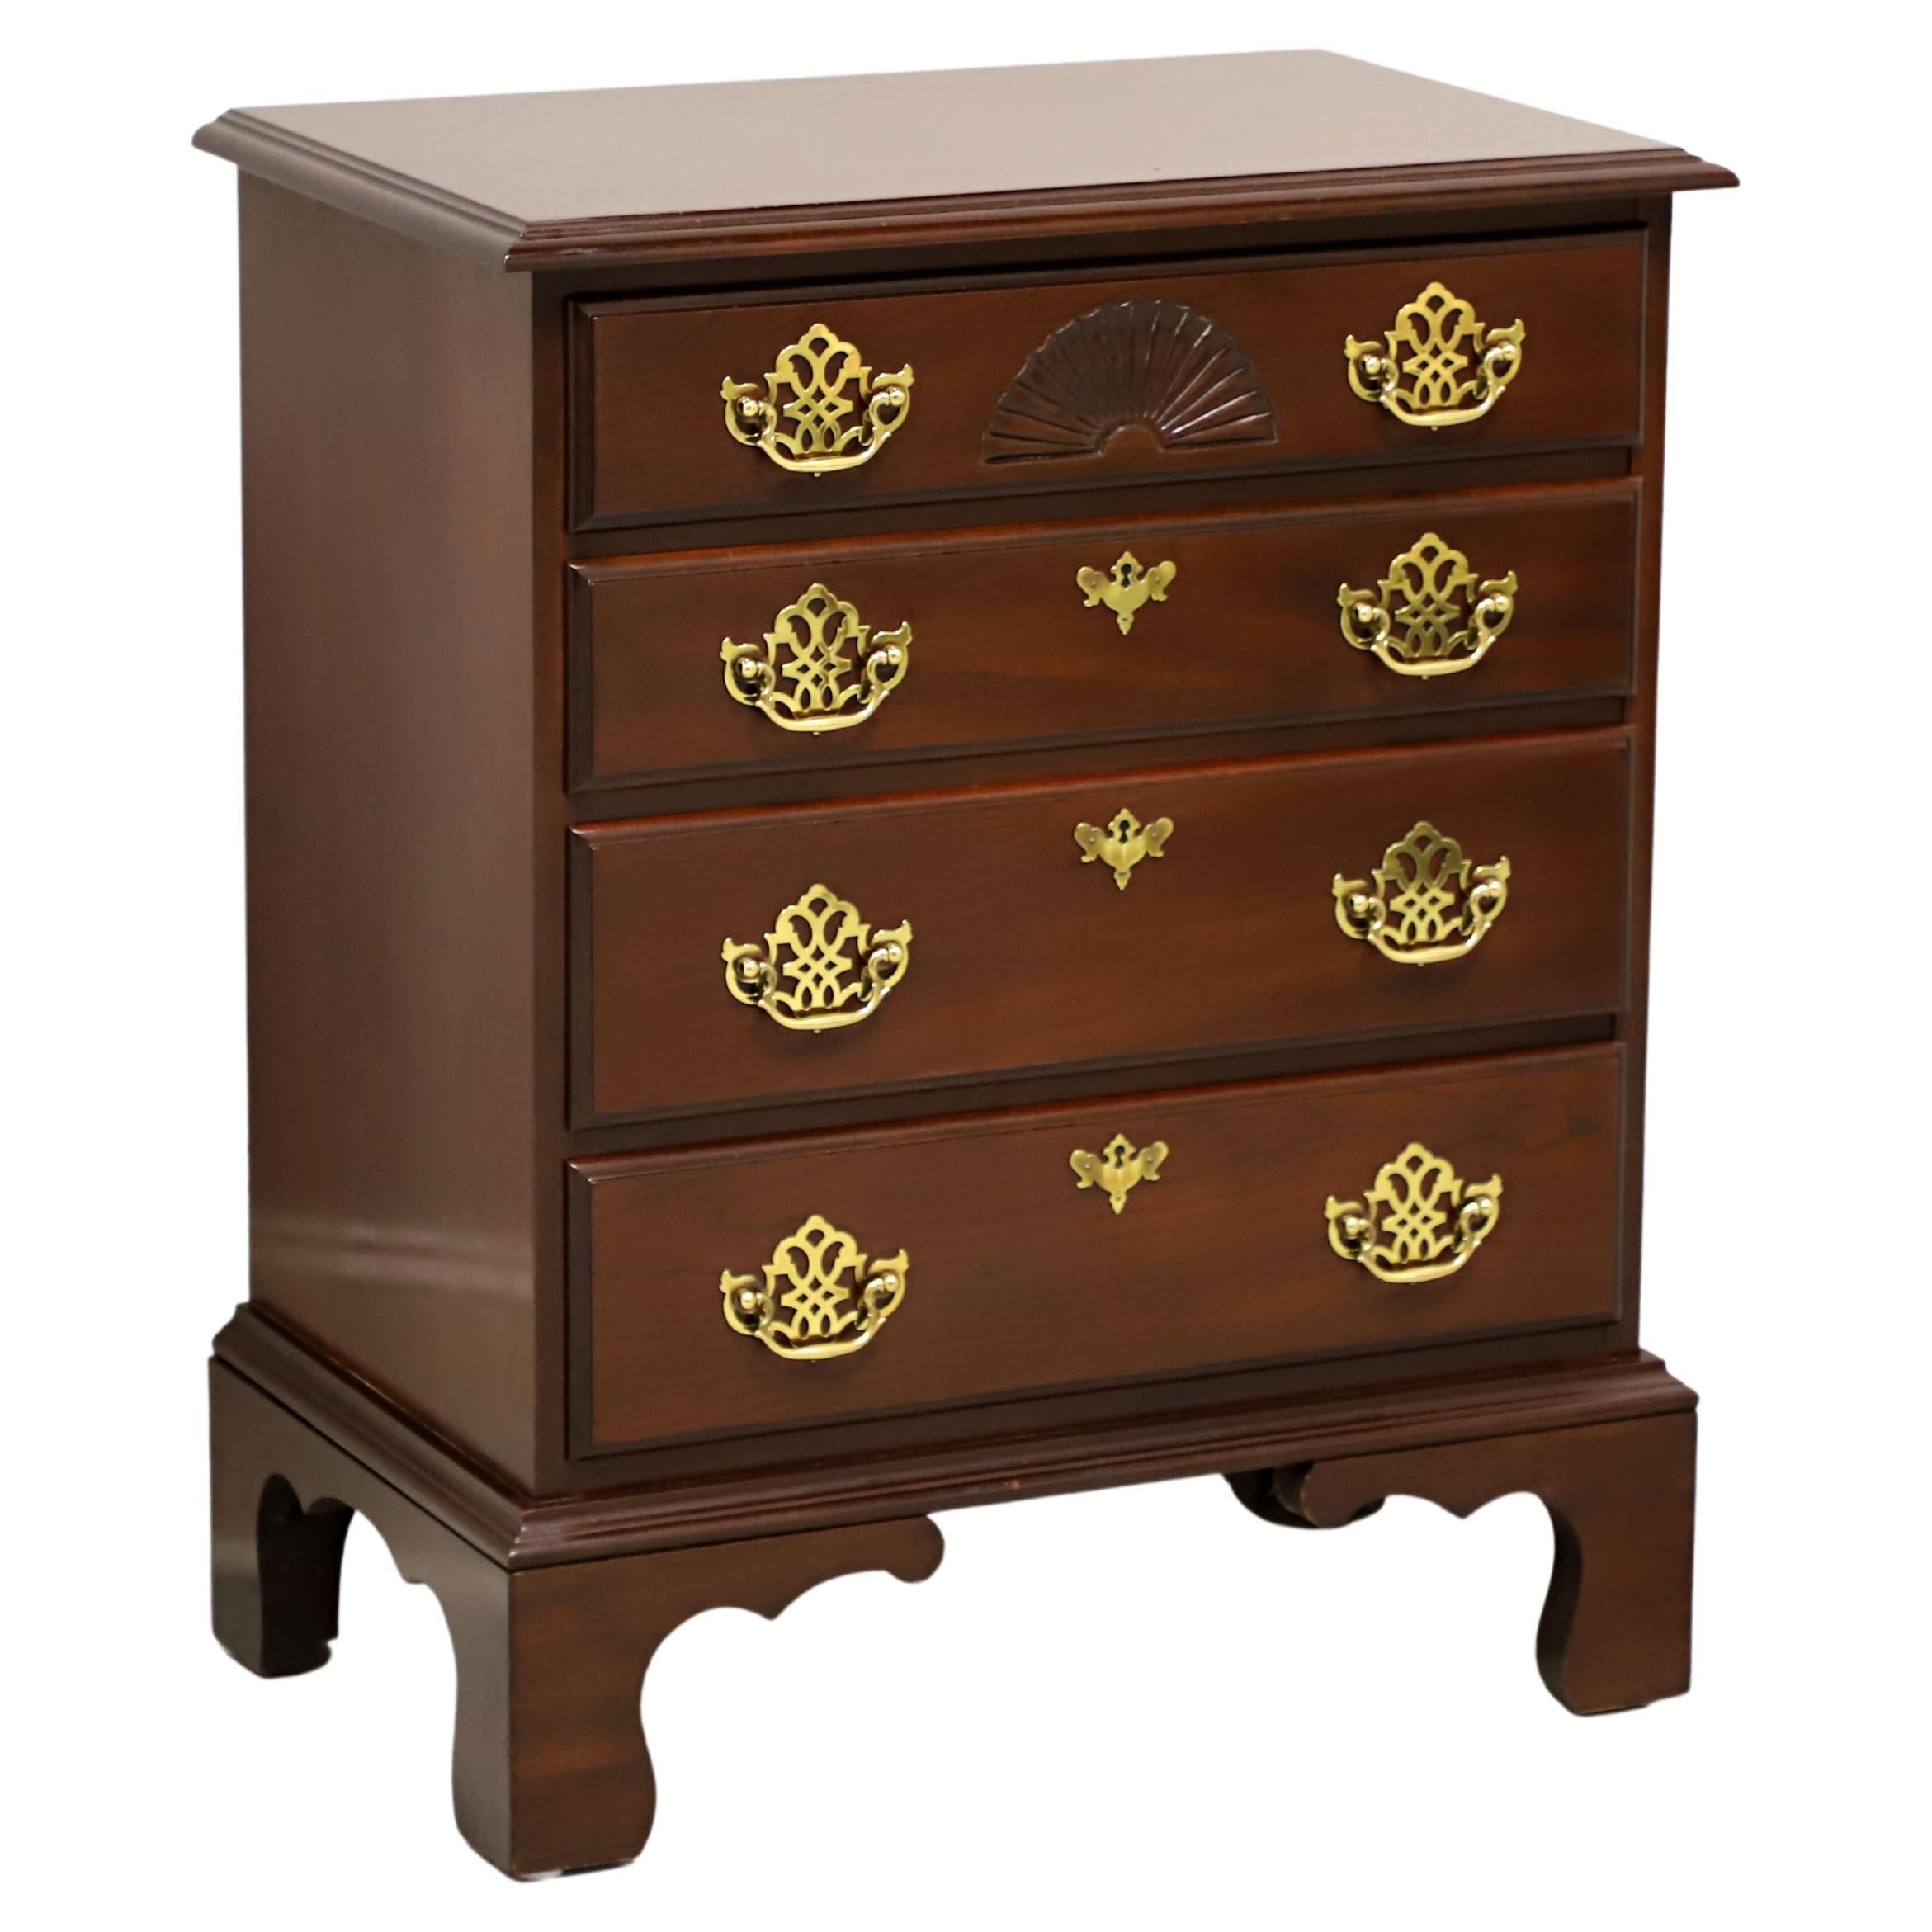 HARDEN Cherry Chippendale Nightstand Bedside Chest